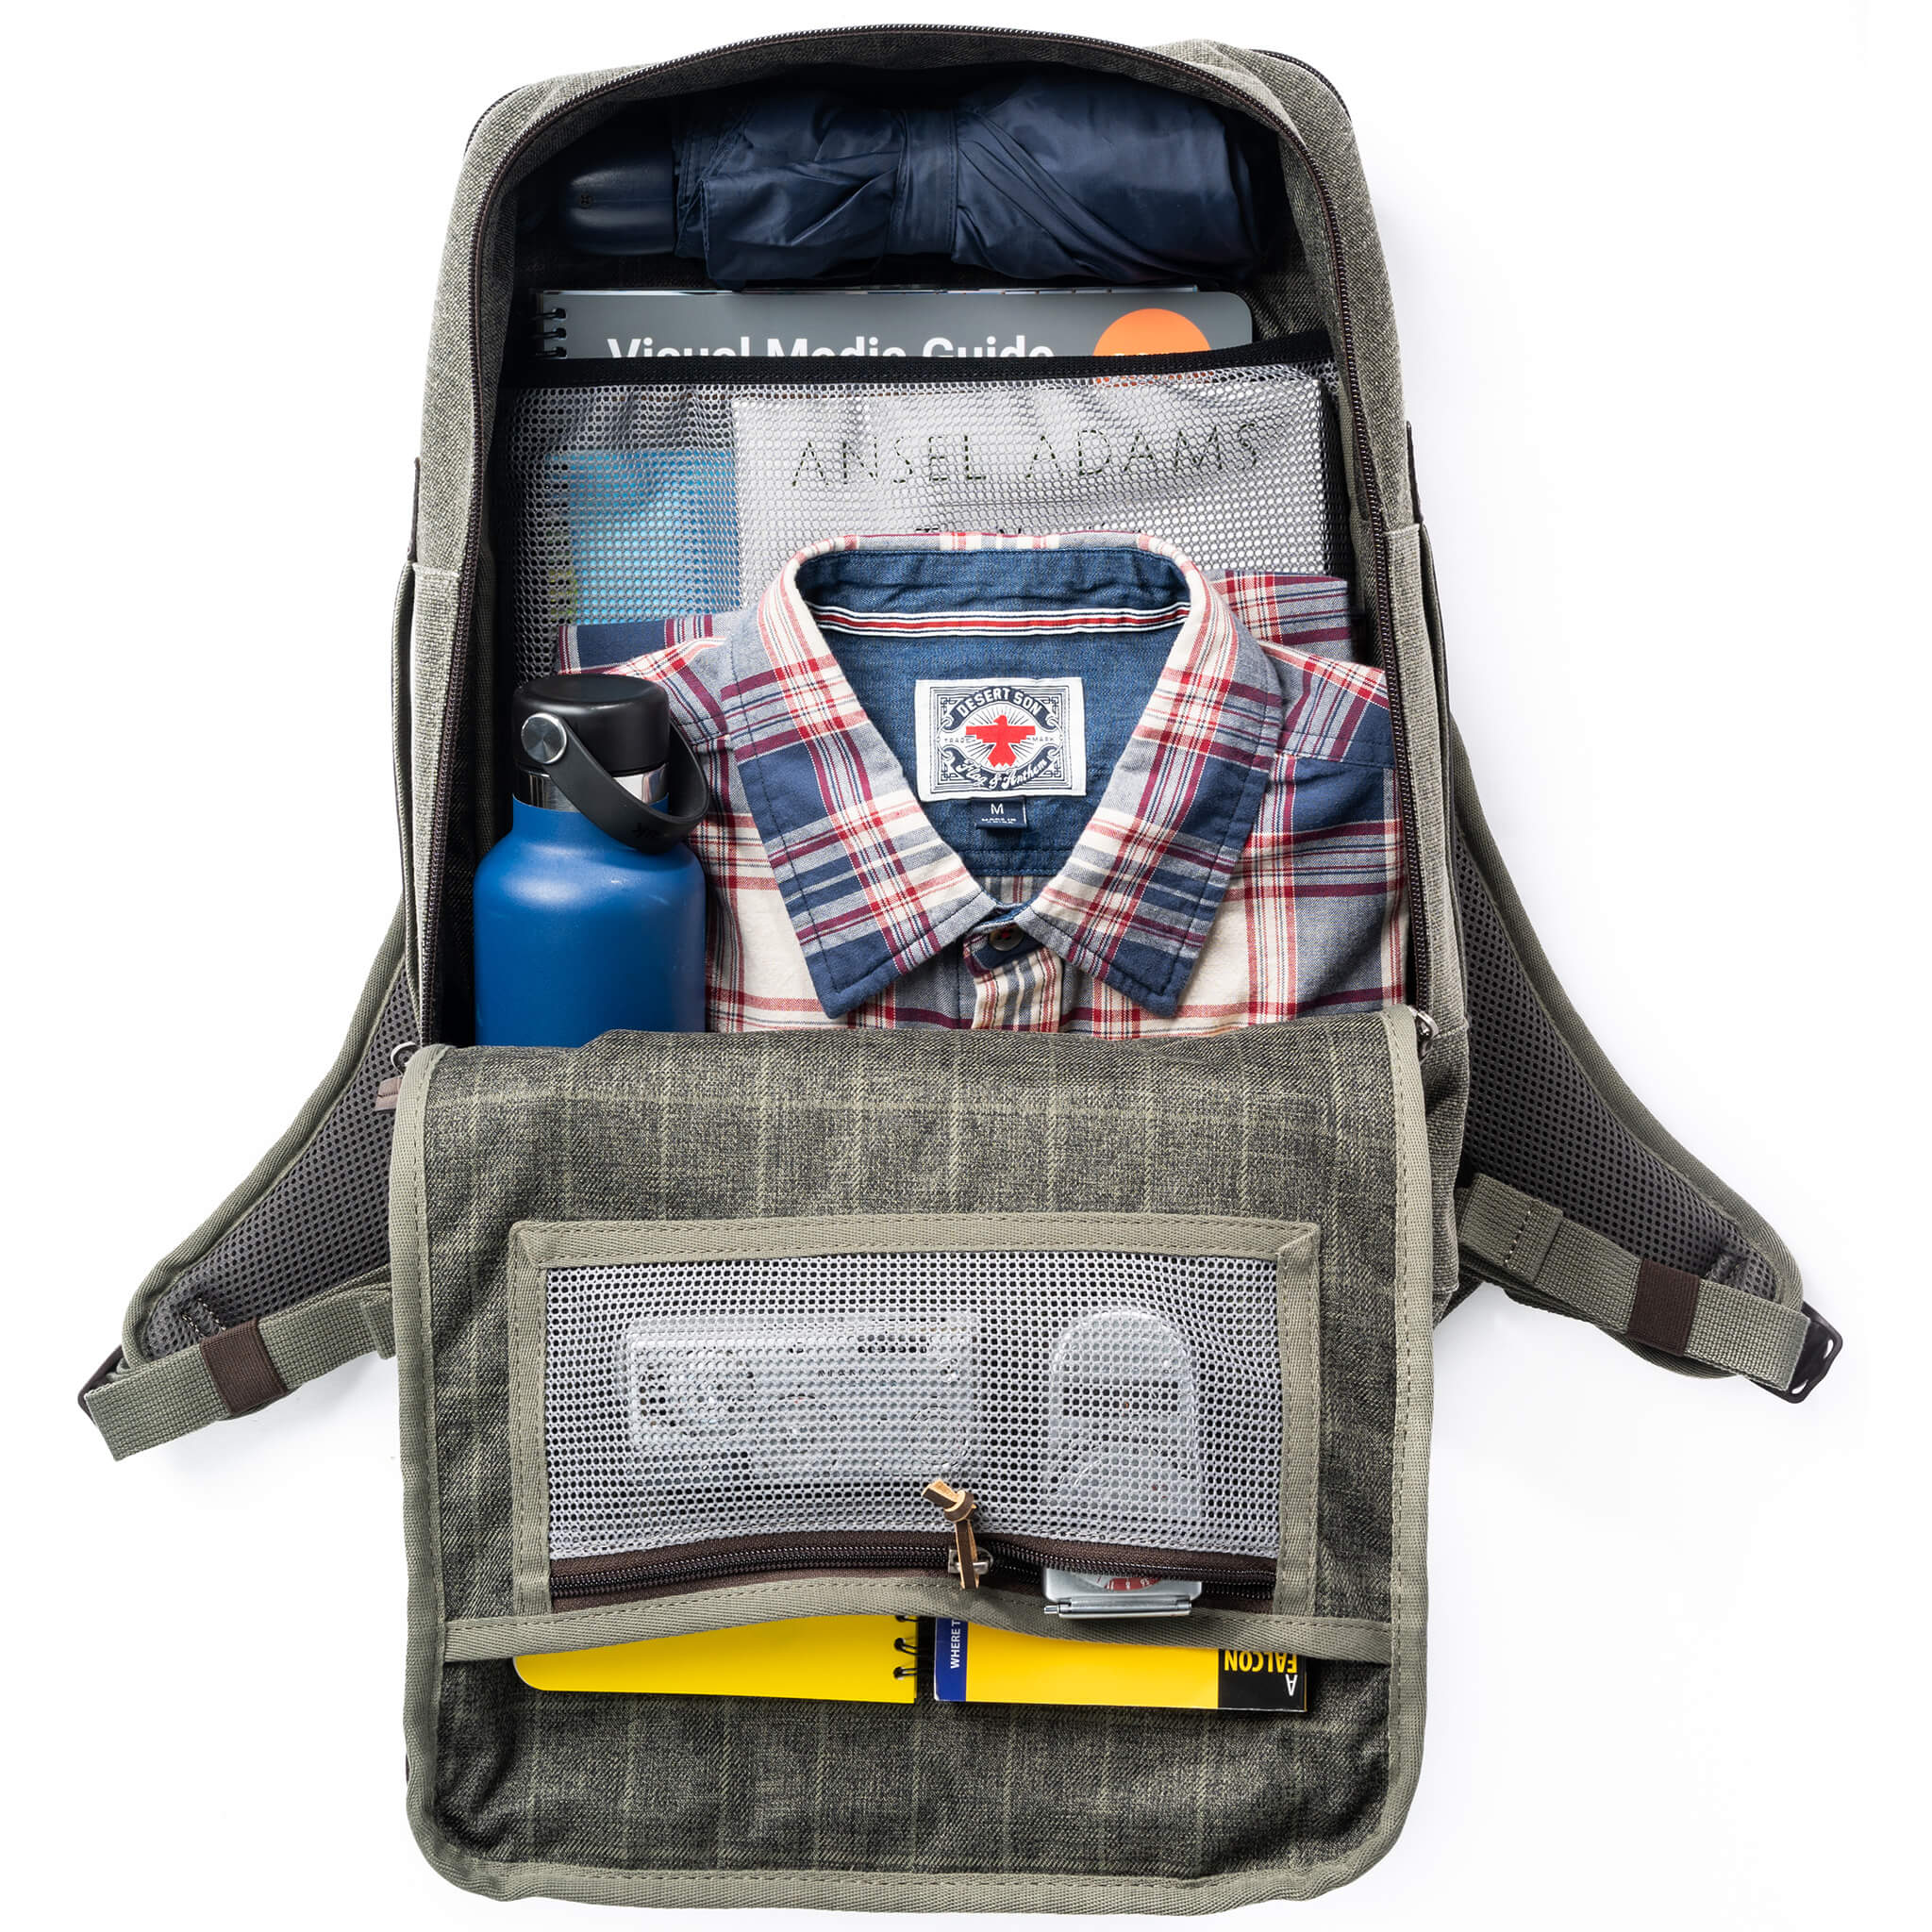 Loadout: In-Flight EDC Pouch | Pack Config